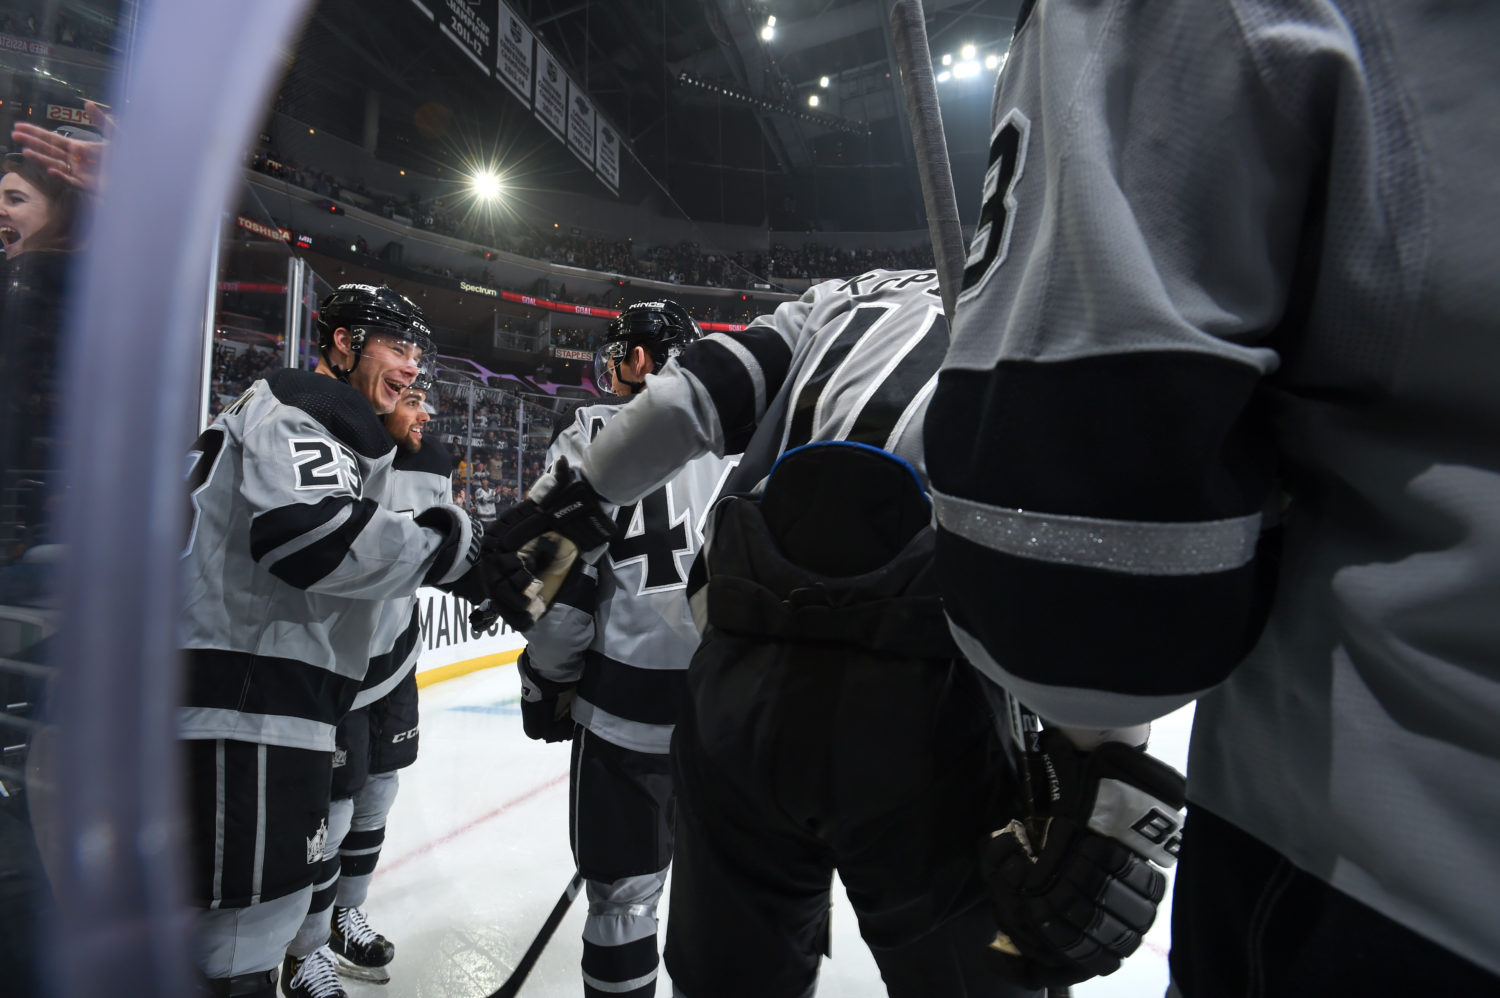 Kings down Flames in OT to extend win streak - The Rink Live   Comprehensive coverage of youth, junior, high school and college hockey